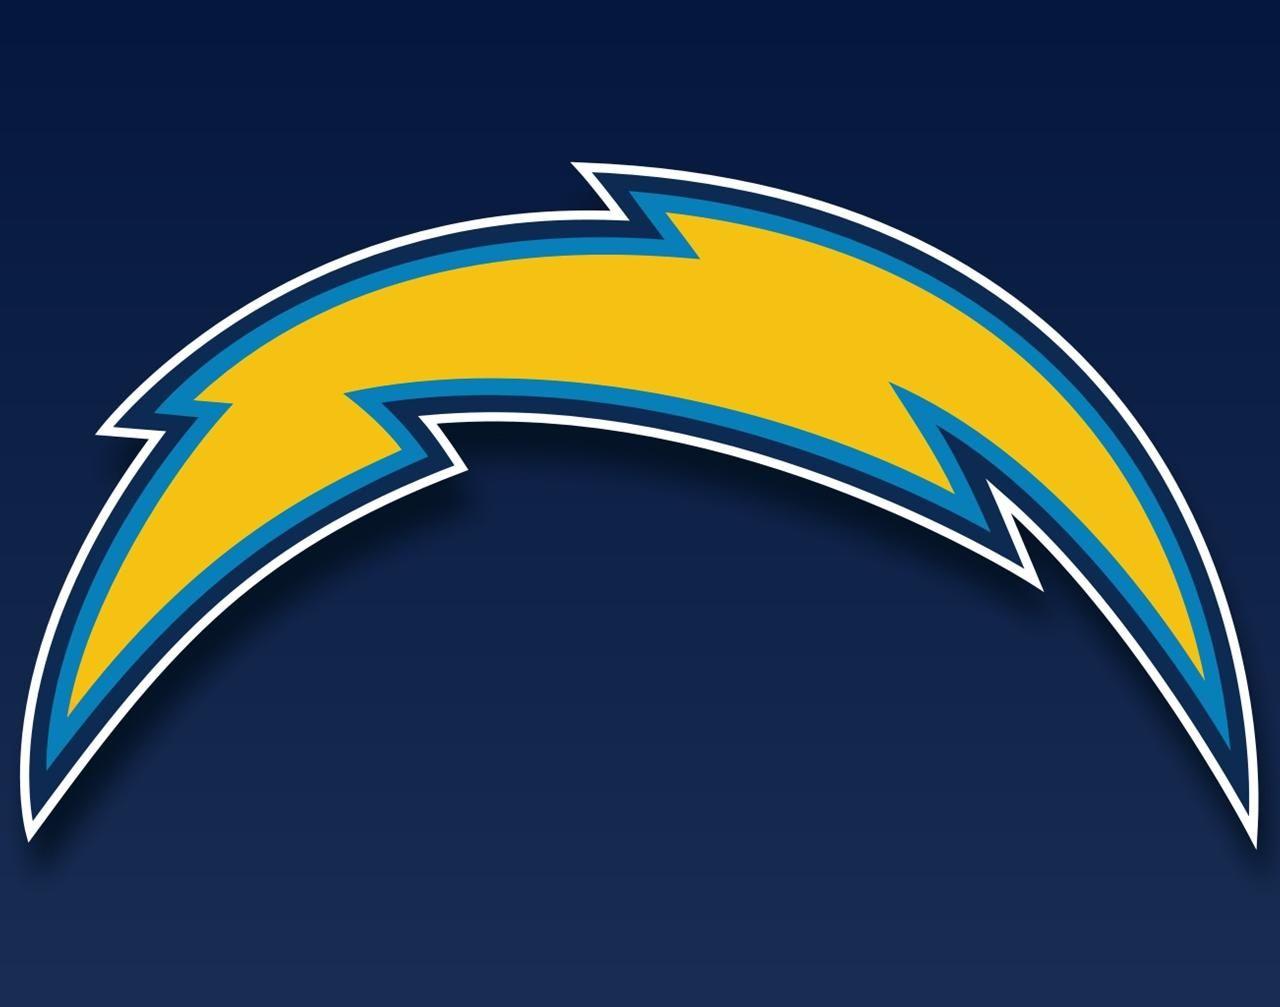 Chargers Football Logo - Chargers football team Logos